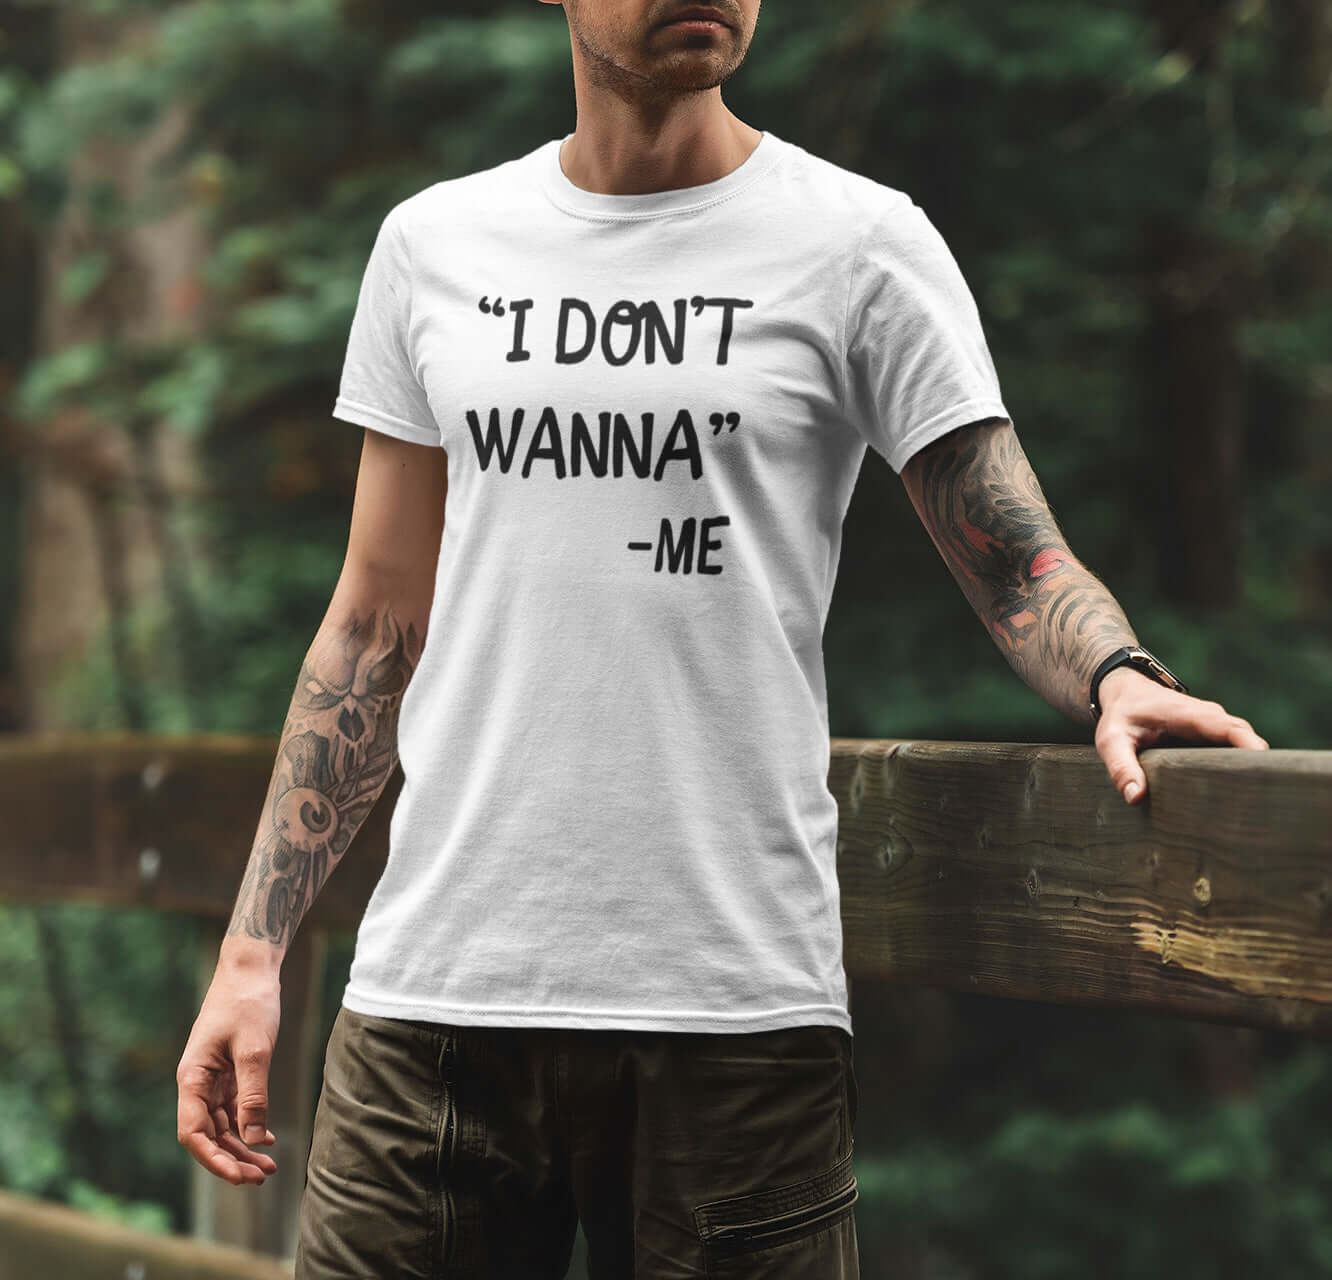 I don't wanna funny self quote t-shirt